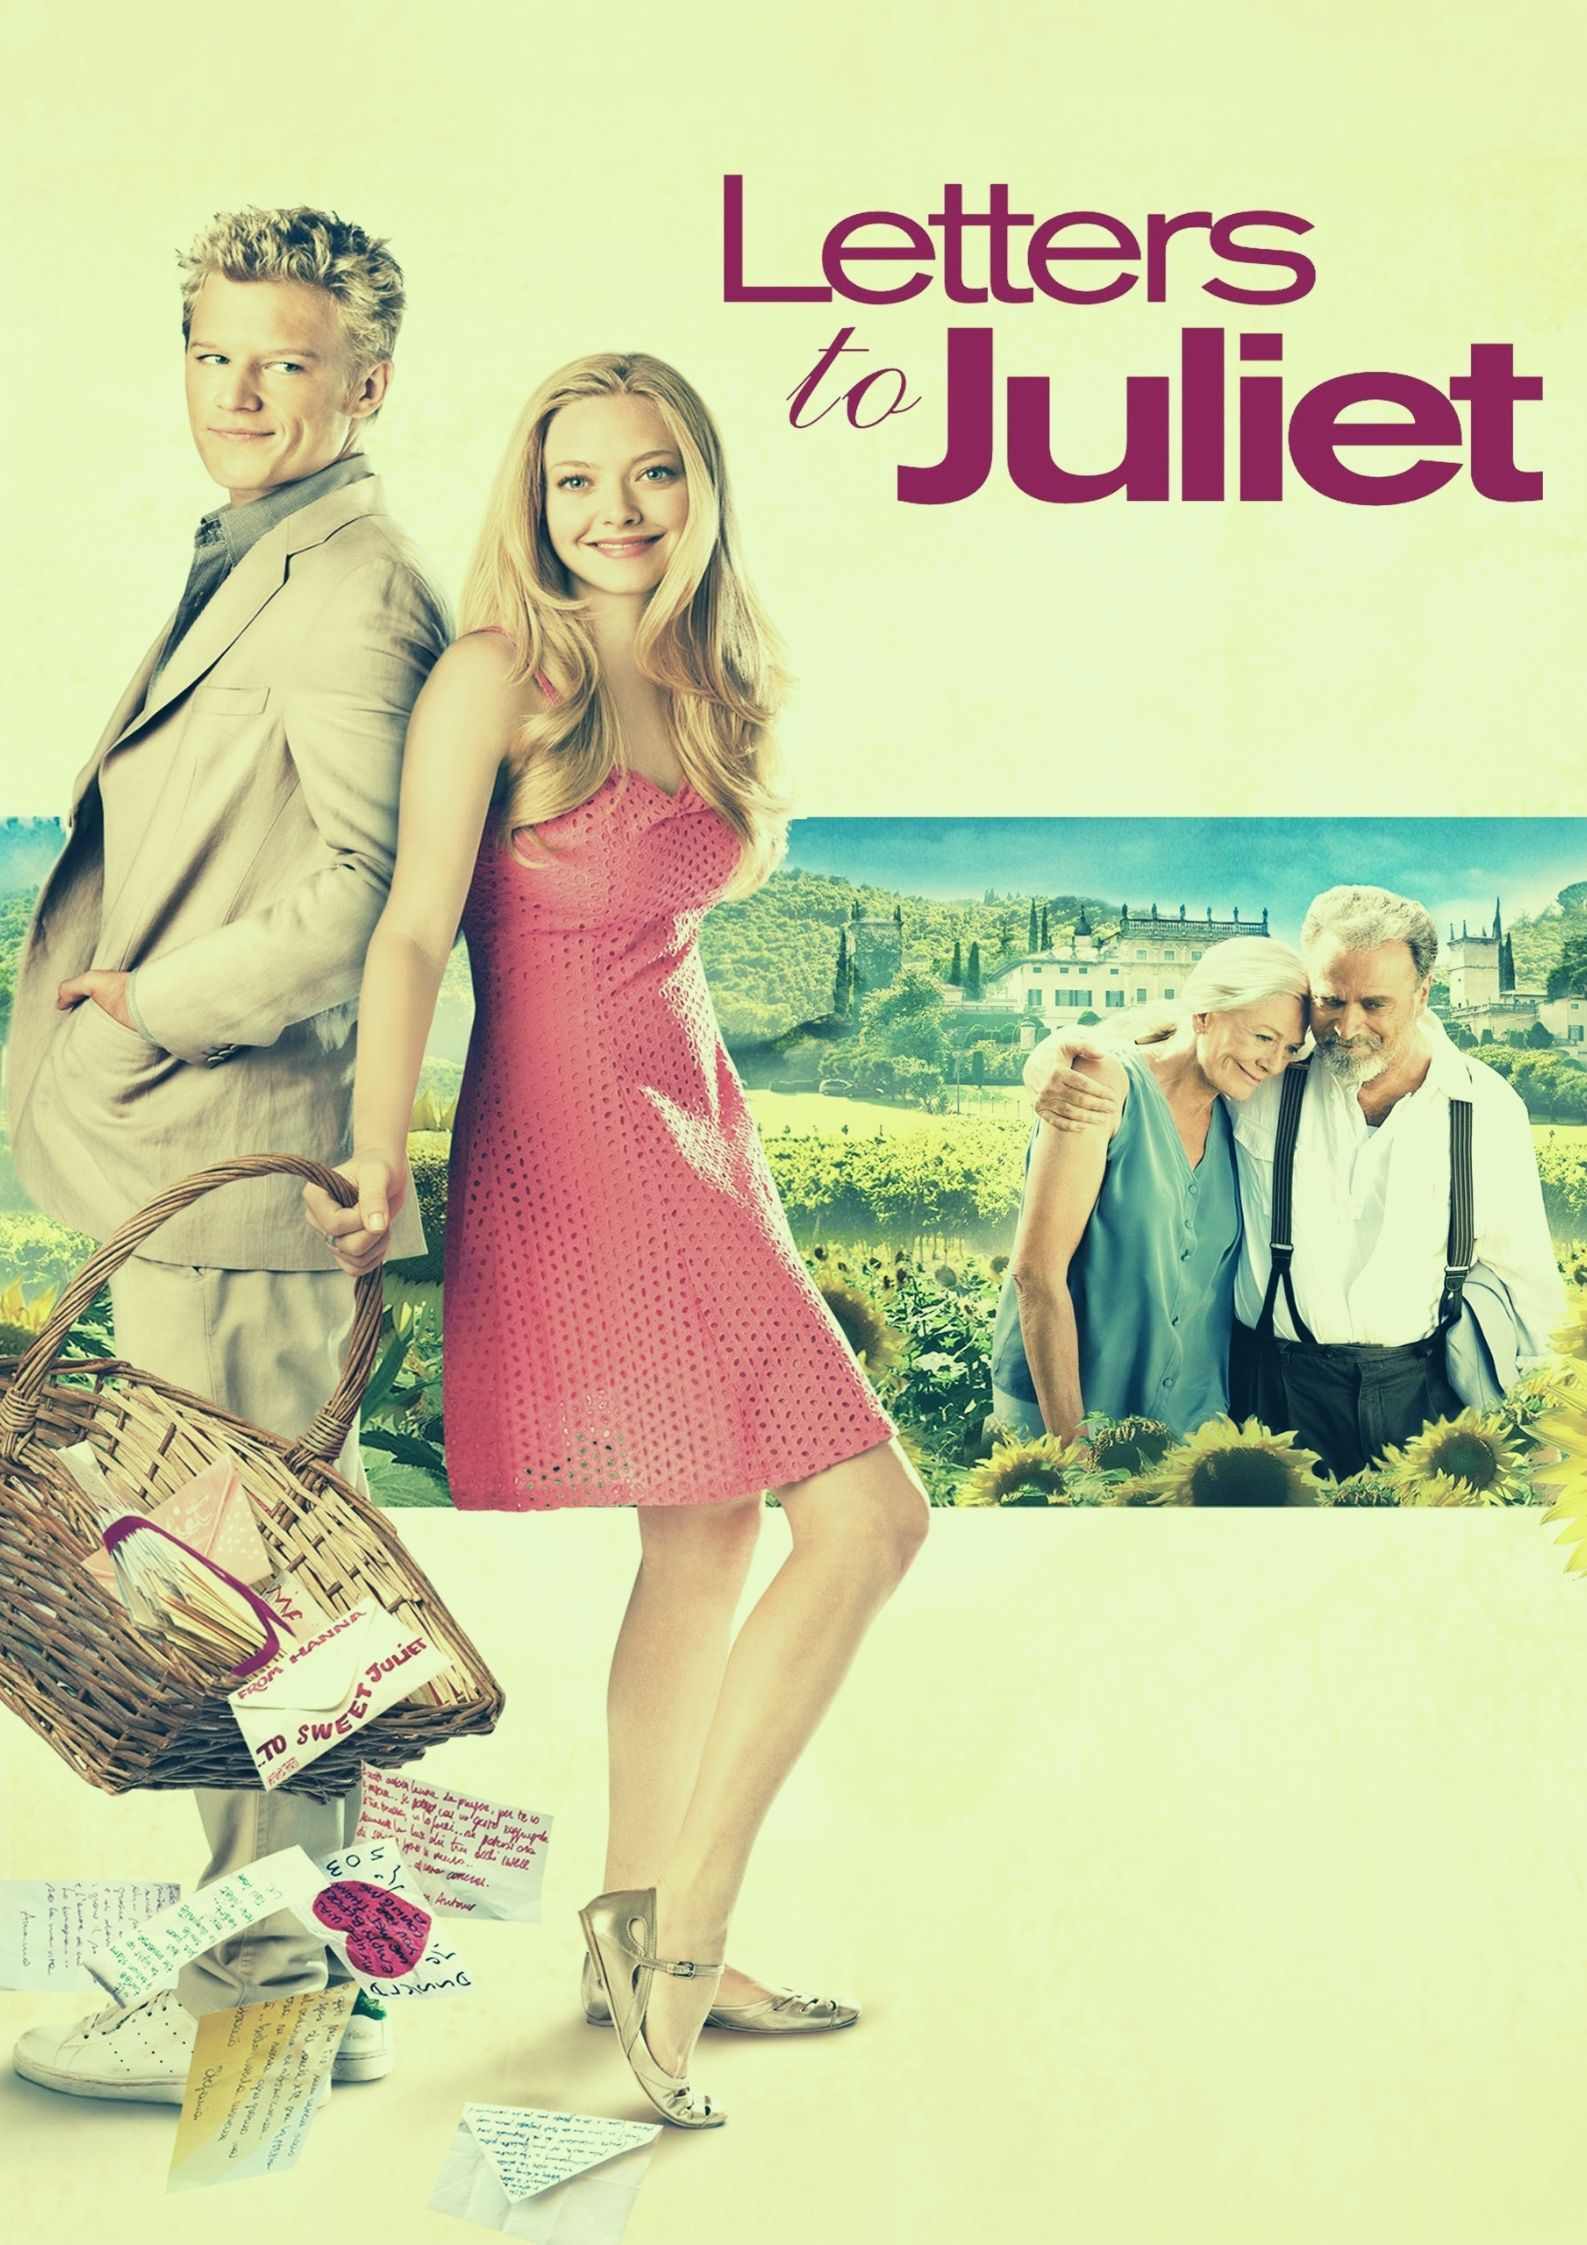 Letters to Juliet Parents Guide | Letters to Juliet Age Rating 2021 Movie